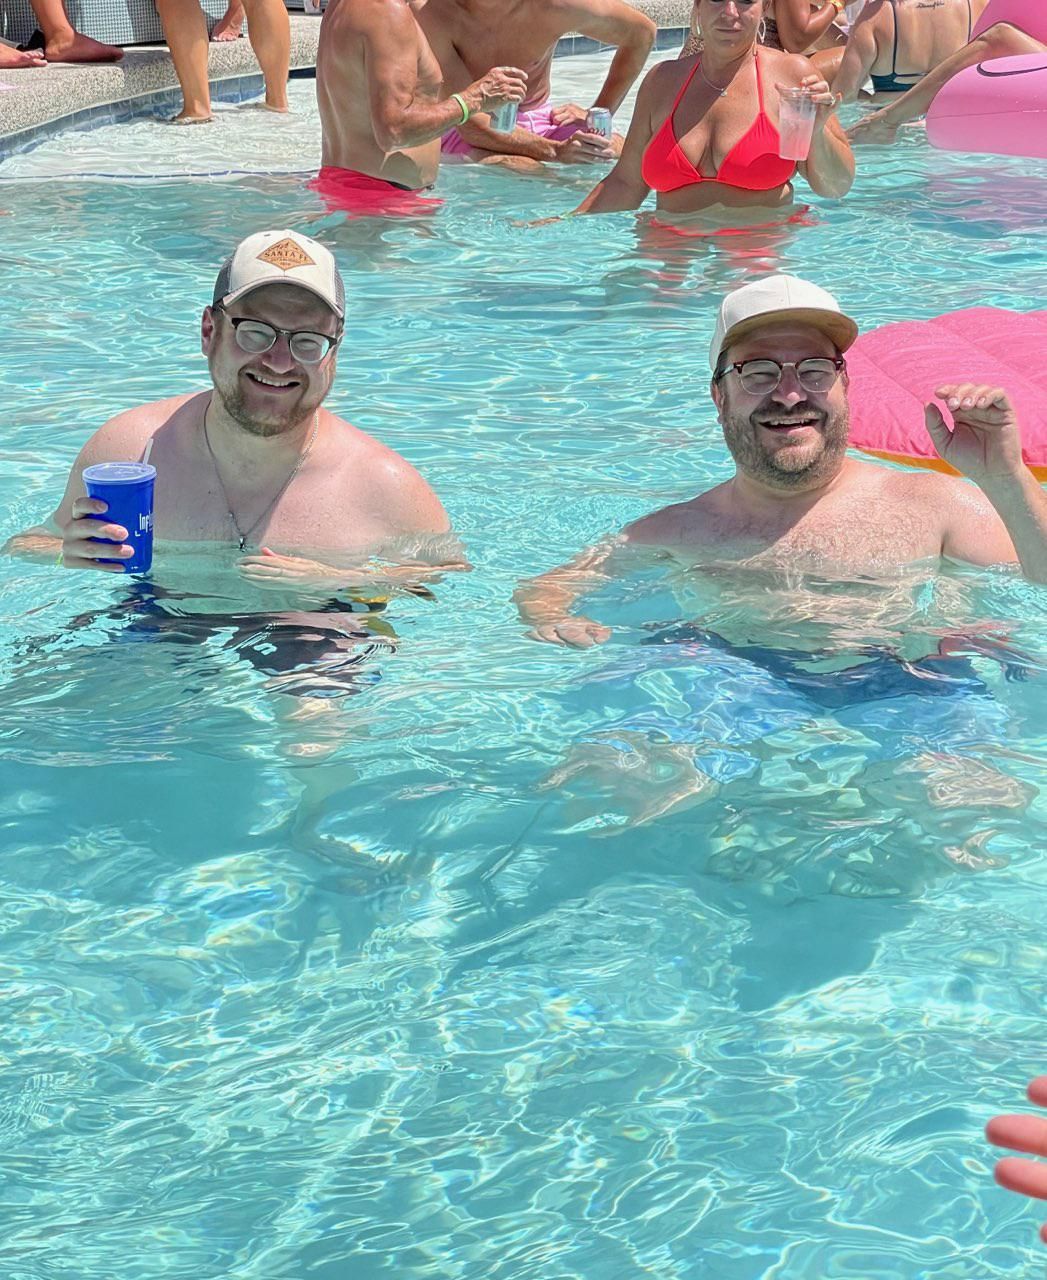 I wasn’t convinced until now…. we are definitely in a simulation. Today I randomly swam past my Doppelseäner at the Flamingo pool in Vegas.